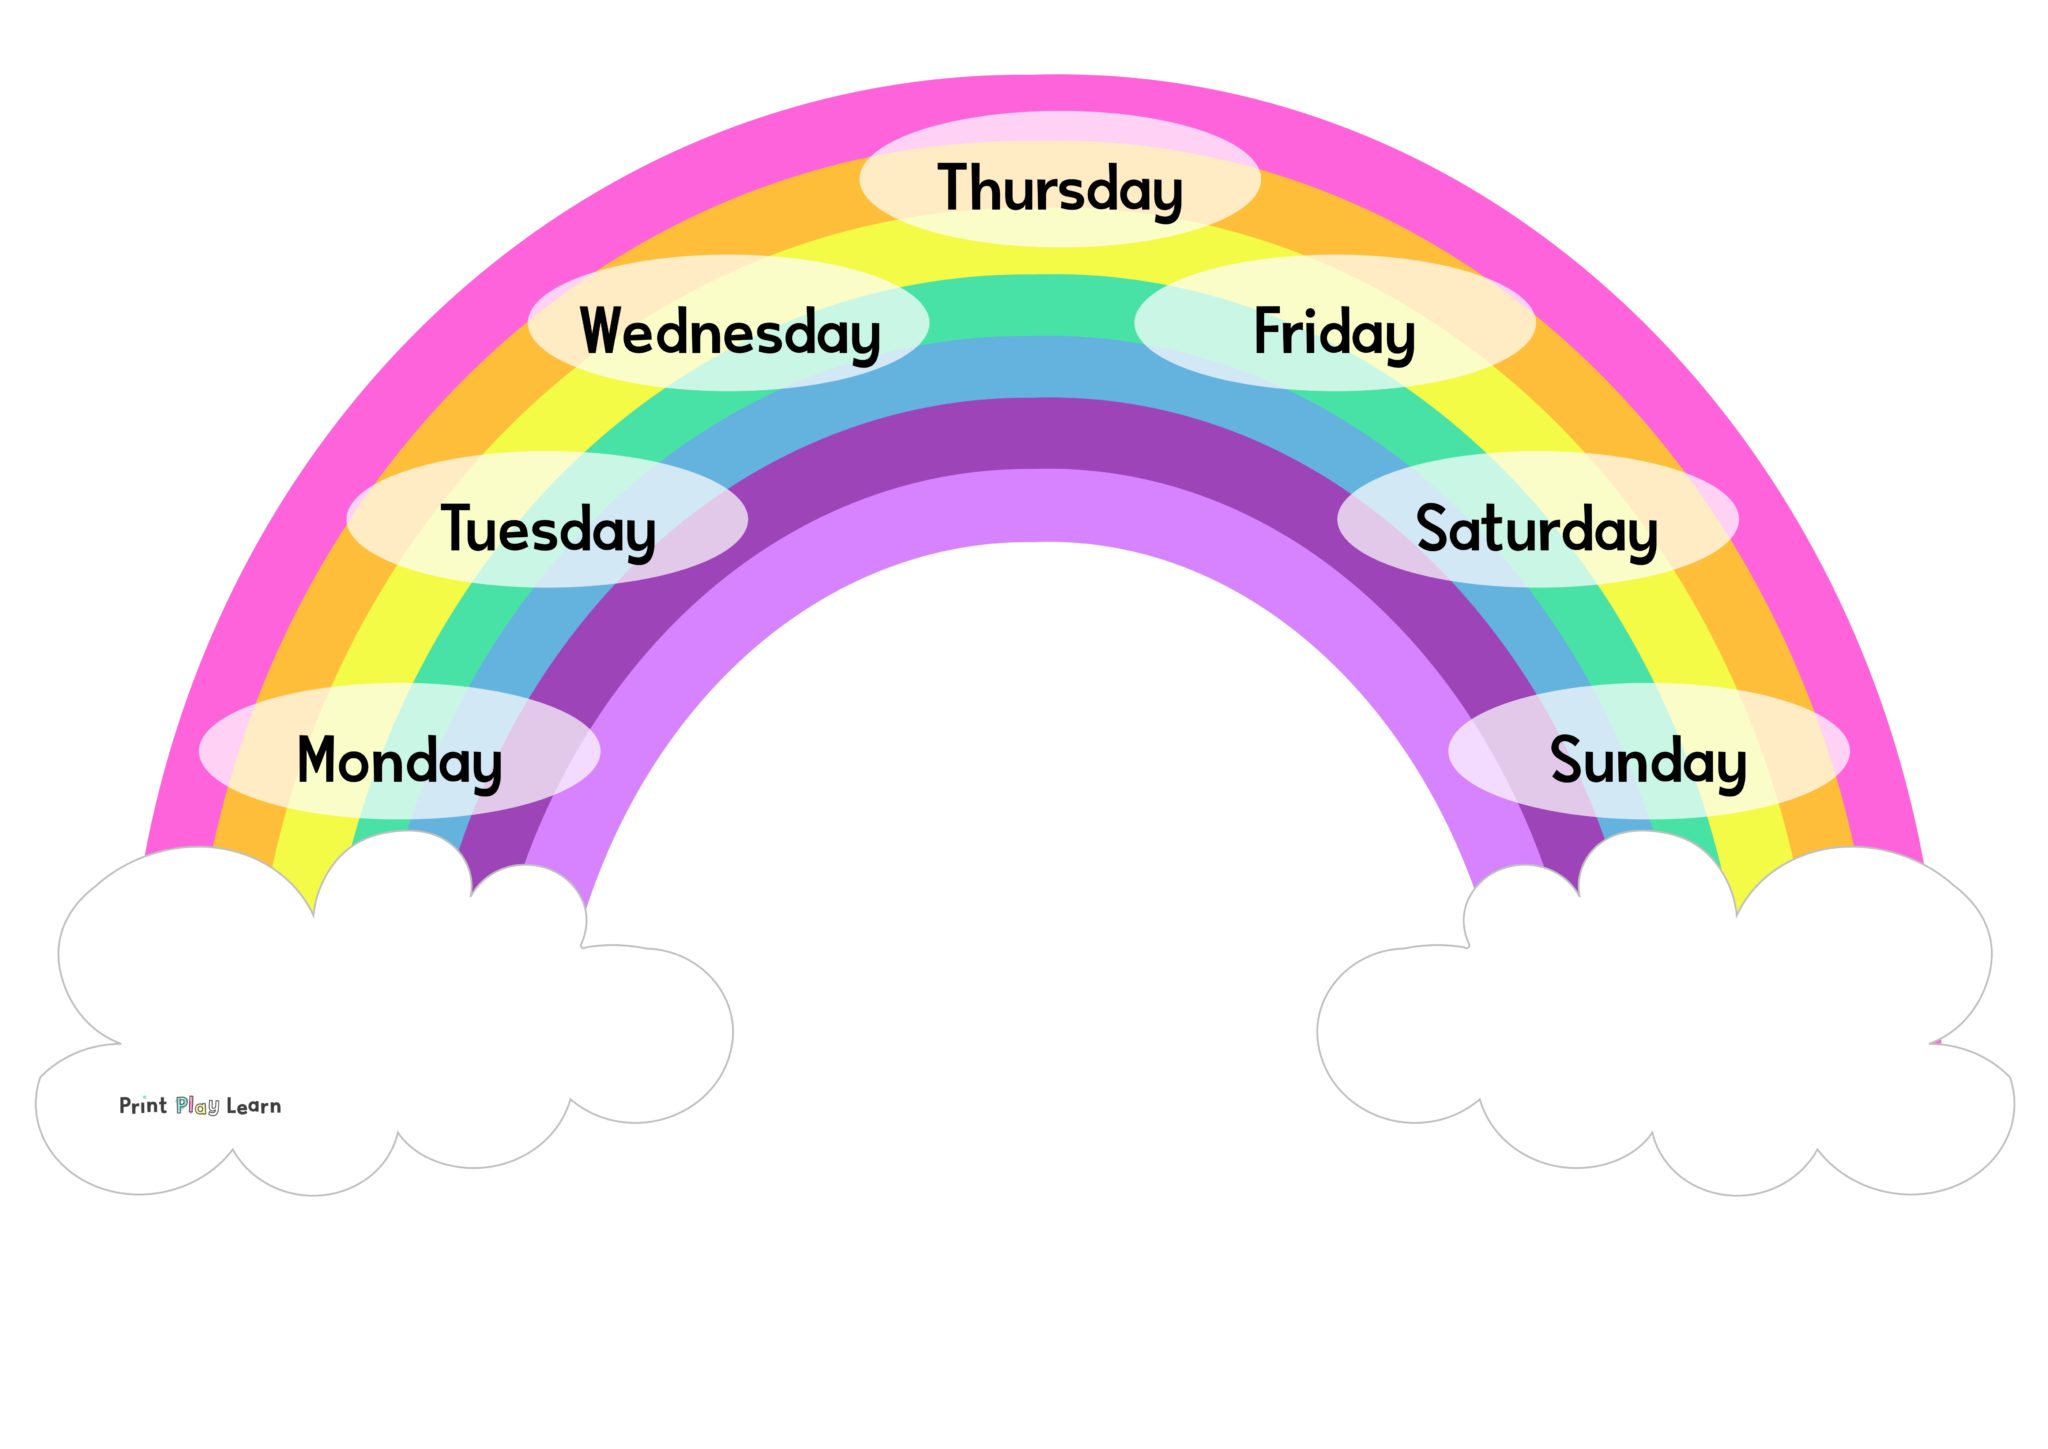 Picture of the week. Days of the week. Days of the week шаблон. Days of the week картинки. Days of the week for Kids.